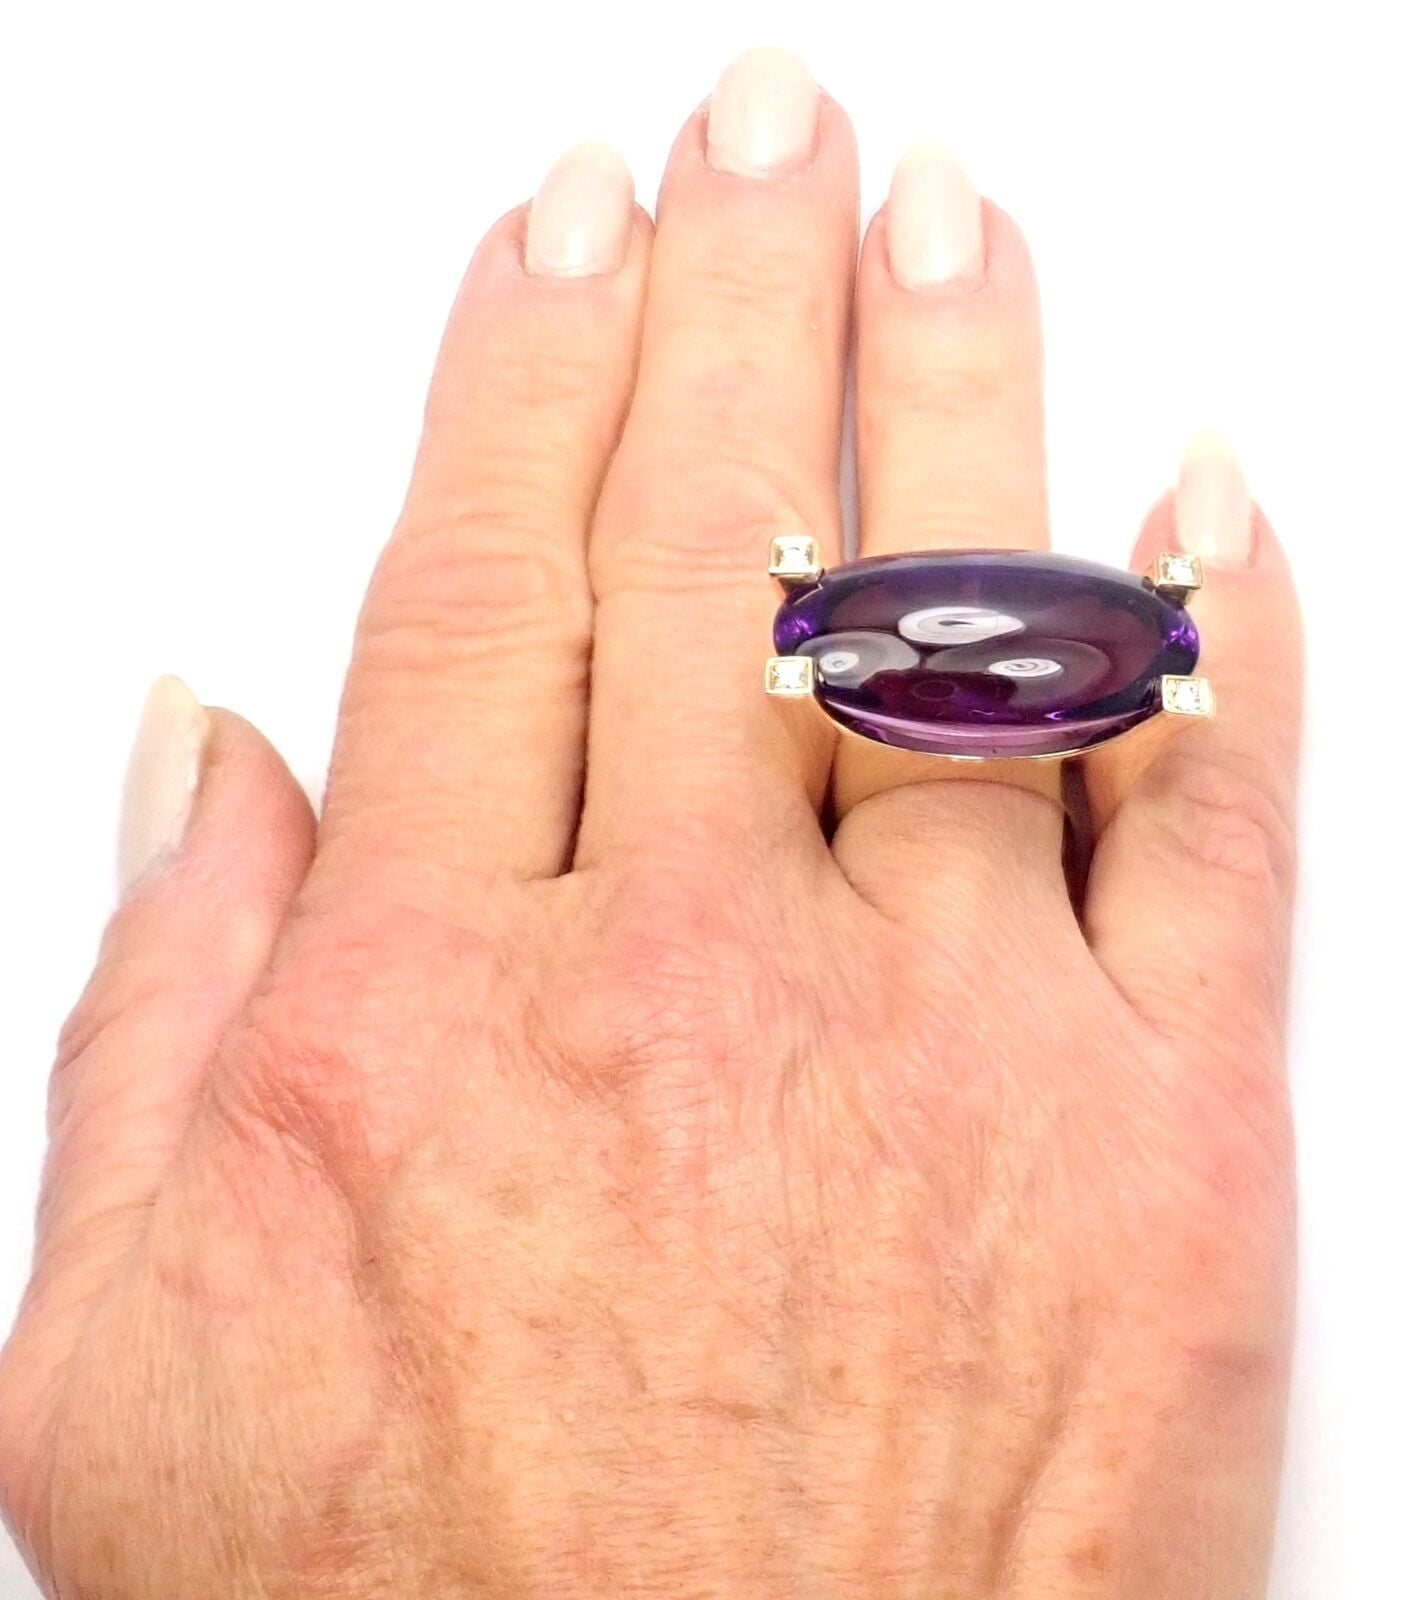 Van Cleef & Arpels Jewelry & Watches:Fine Jewelry:Rings Authentic Van Cleef & Arpels 18k Yellow Gold Diamond Large Amethyst Ring